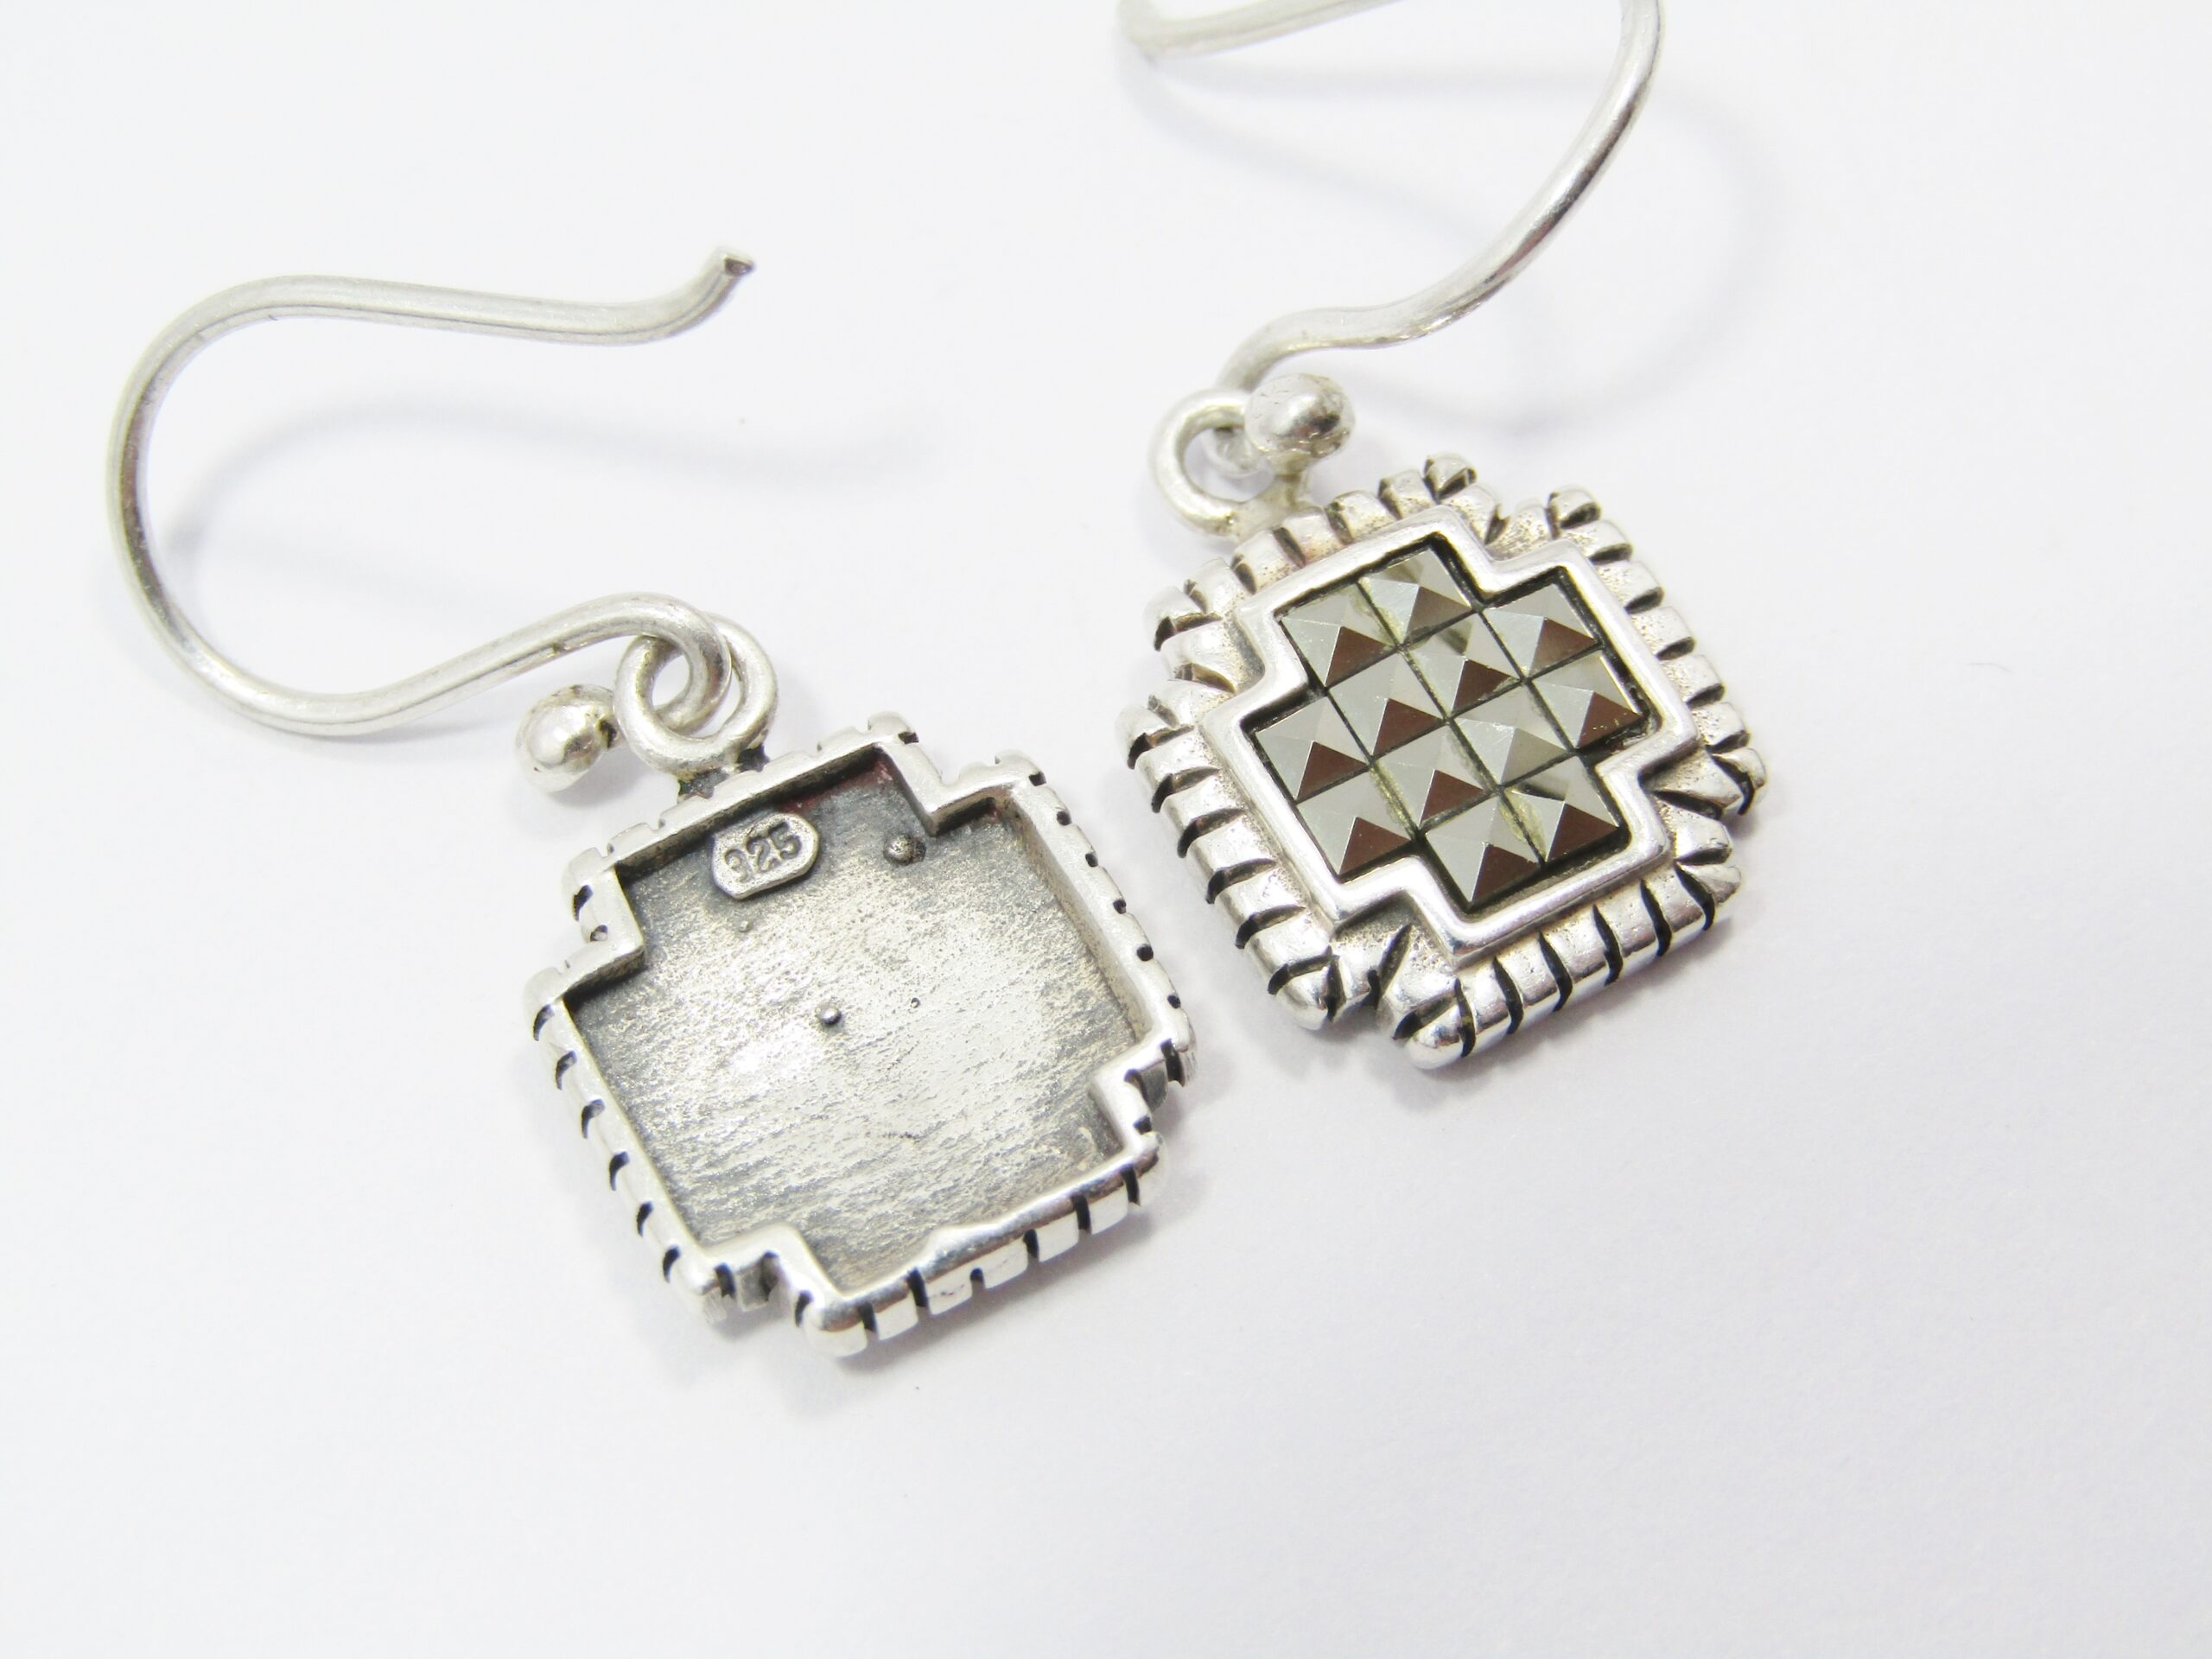 A Gorgeous Pair of Marcasite Dangling Earrings in Sterling Silver